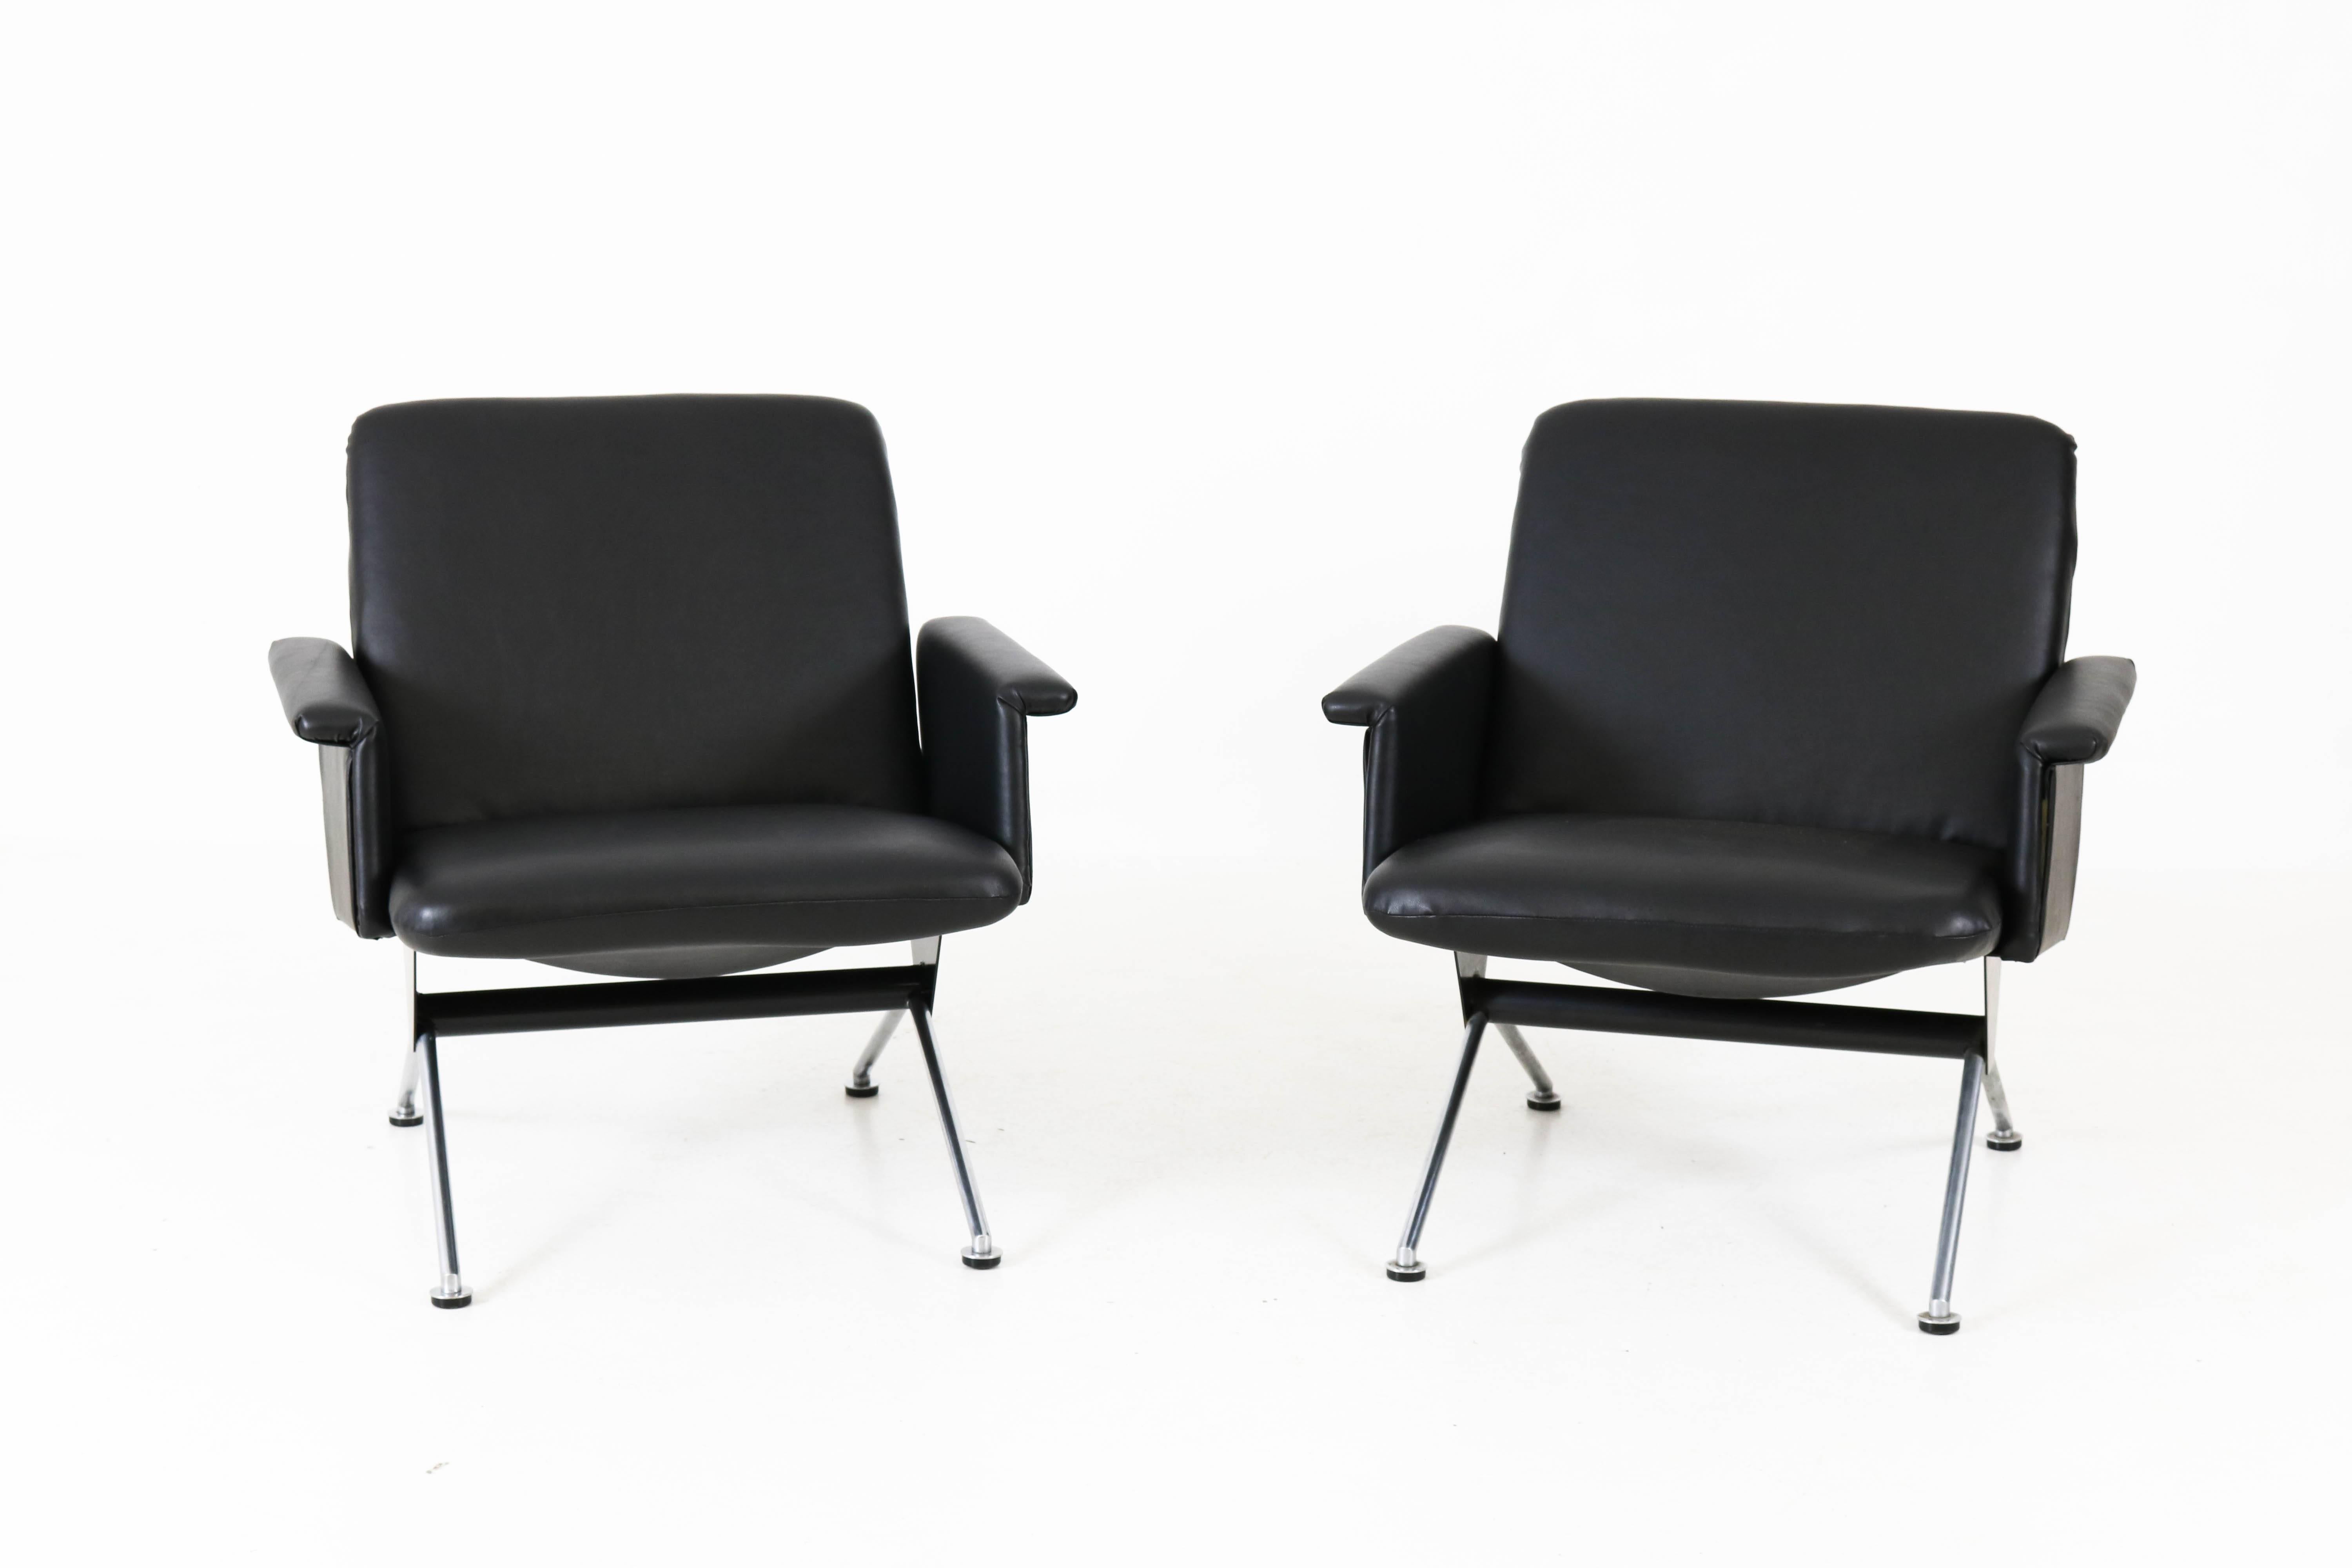 Offered by Amsterdam Modernism:
Rare pair of Mid-Century Modern lounge chairs no. 1432 by Andre Cordemeijer for Gispen, 1961.
Graphite-black lacquered metal frame with chrome-plated legs.
Re-upholstered in black faux leather.
In very good condition